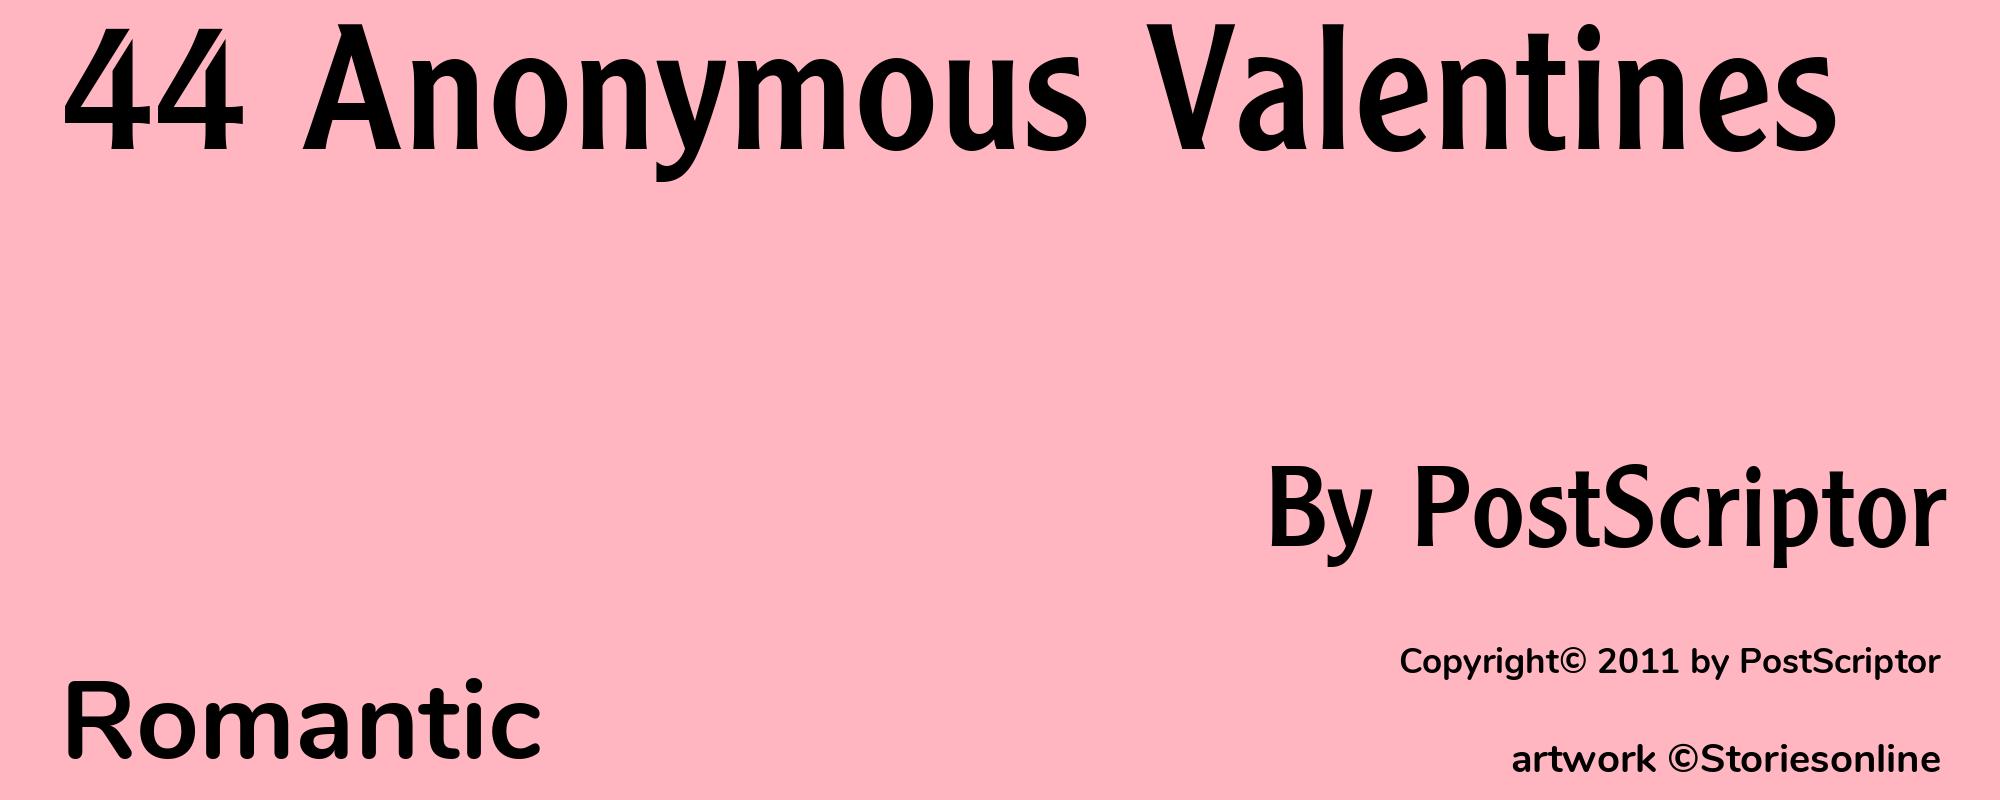 44 Anonymous Valentines - Cover